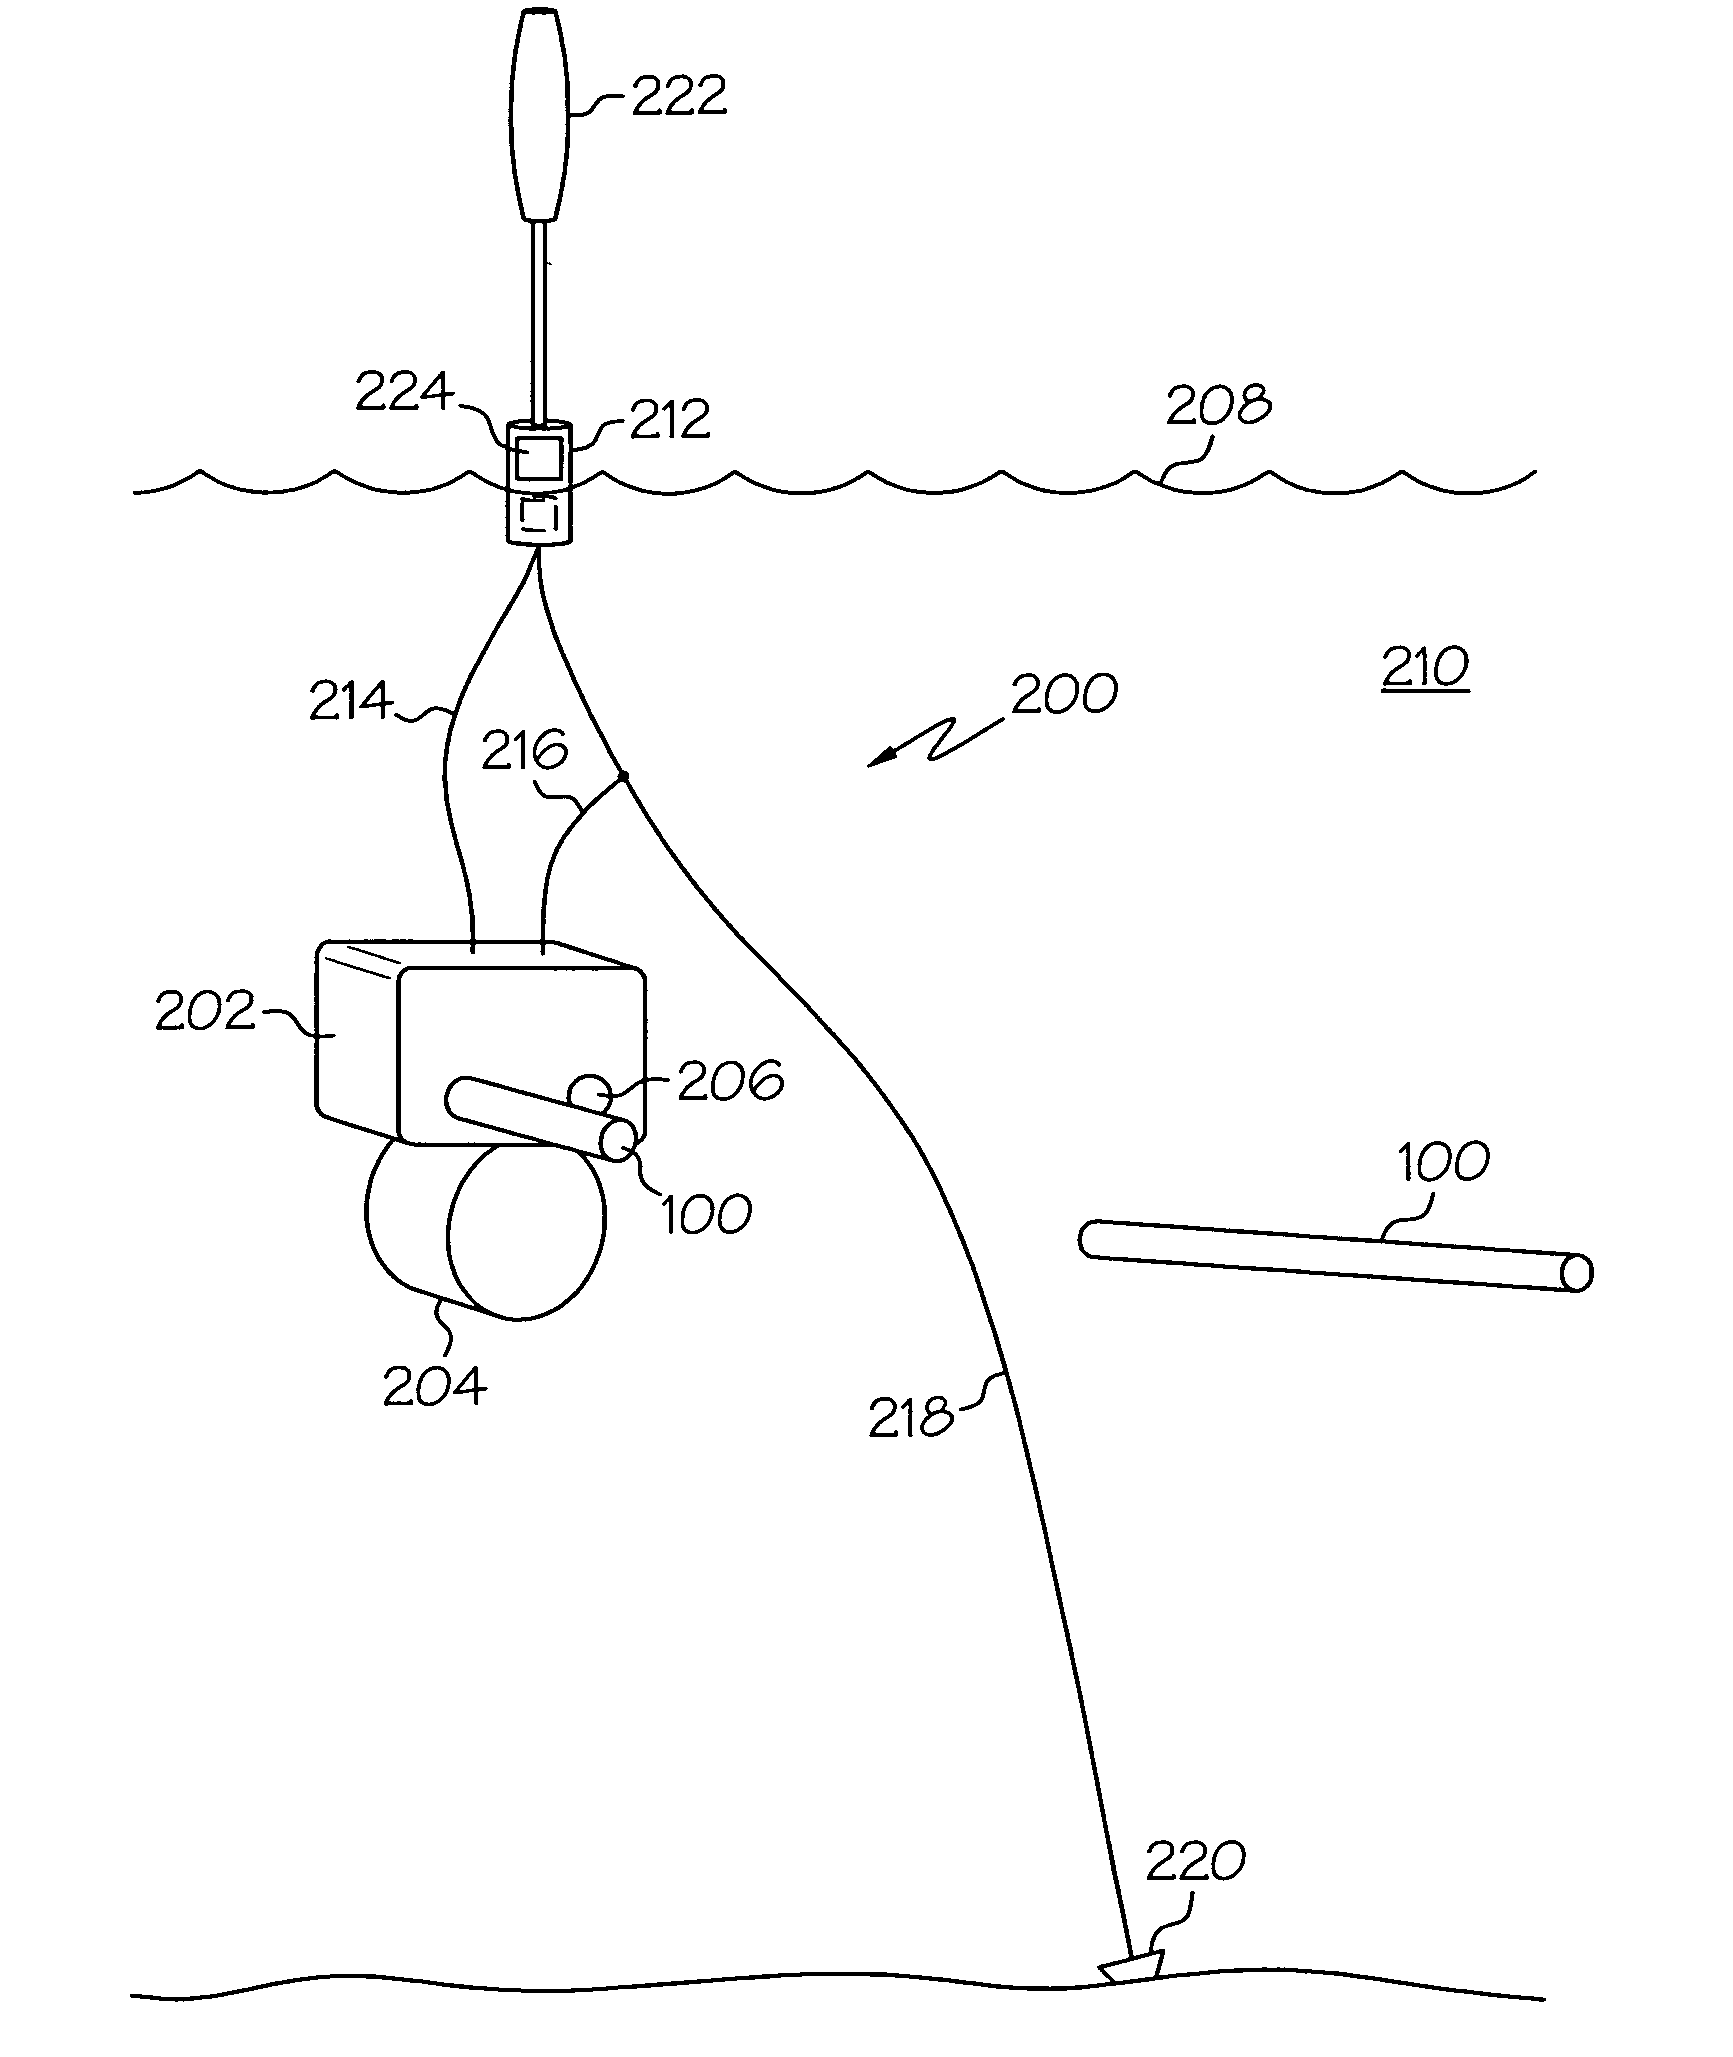 Unmanned underwater vehicle docking station coupling system and method